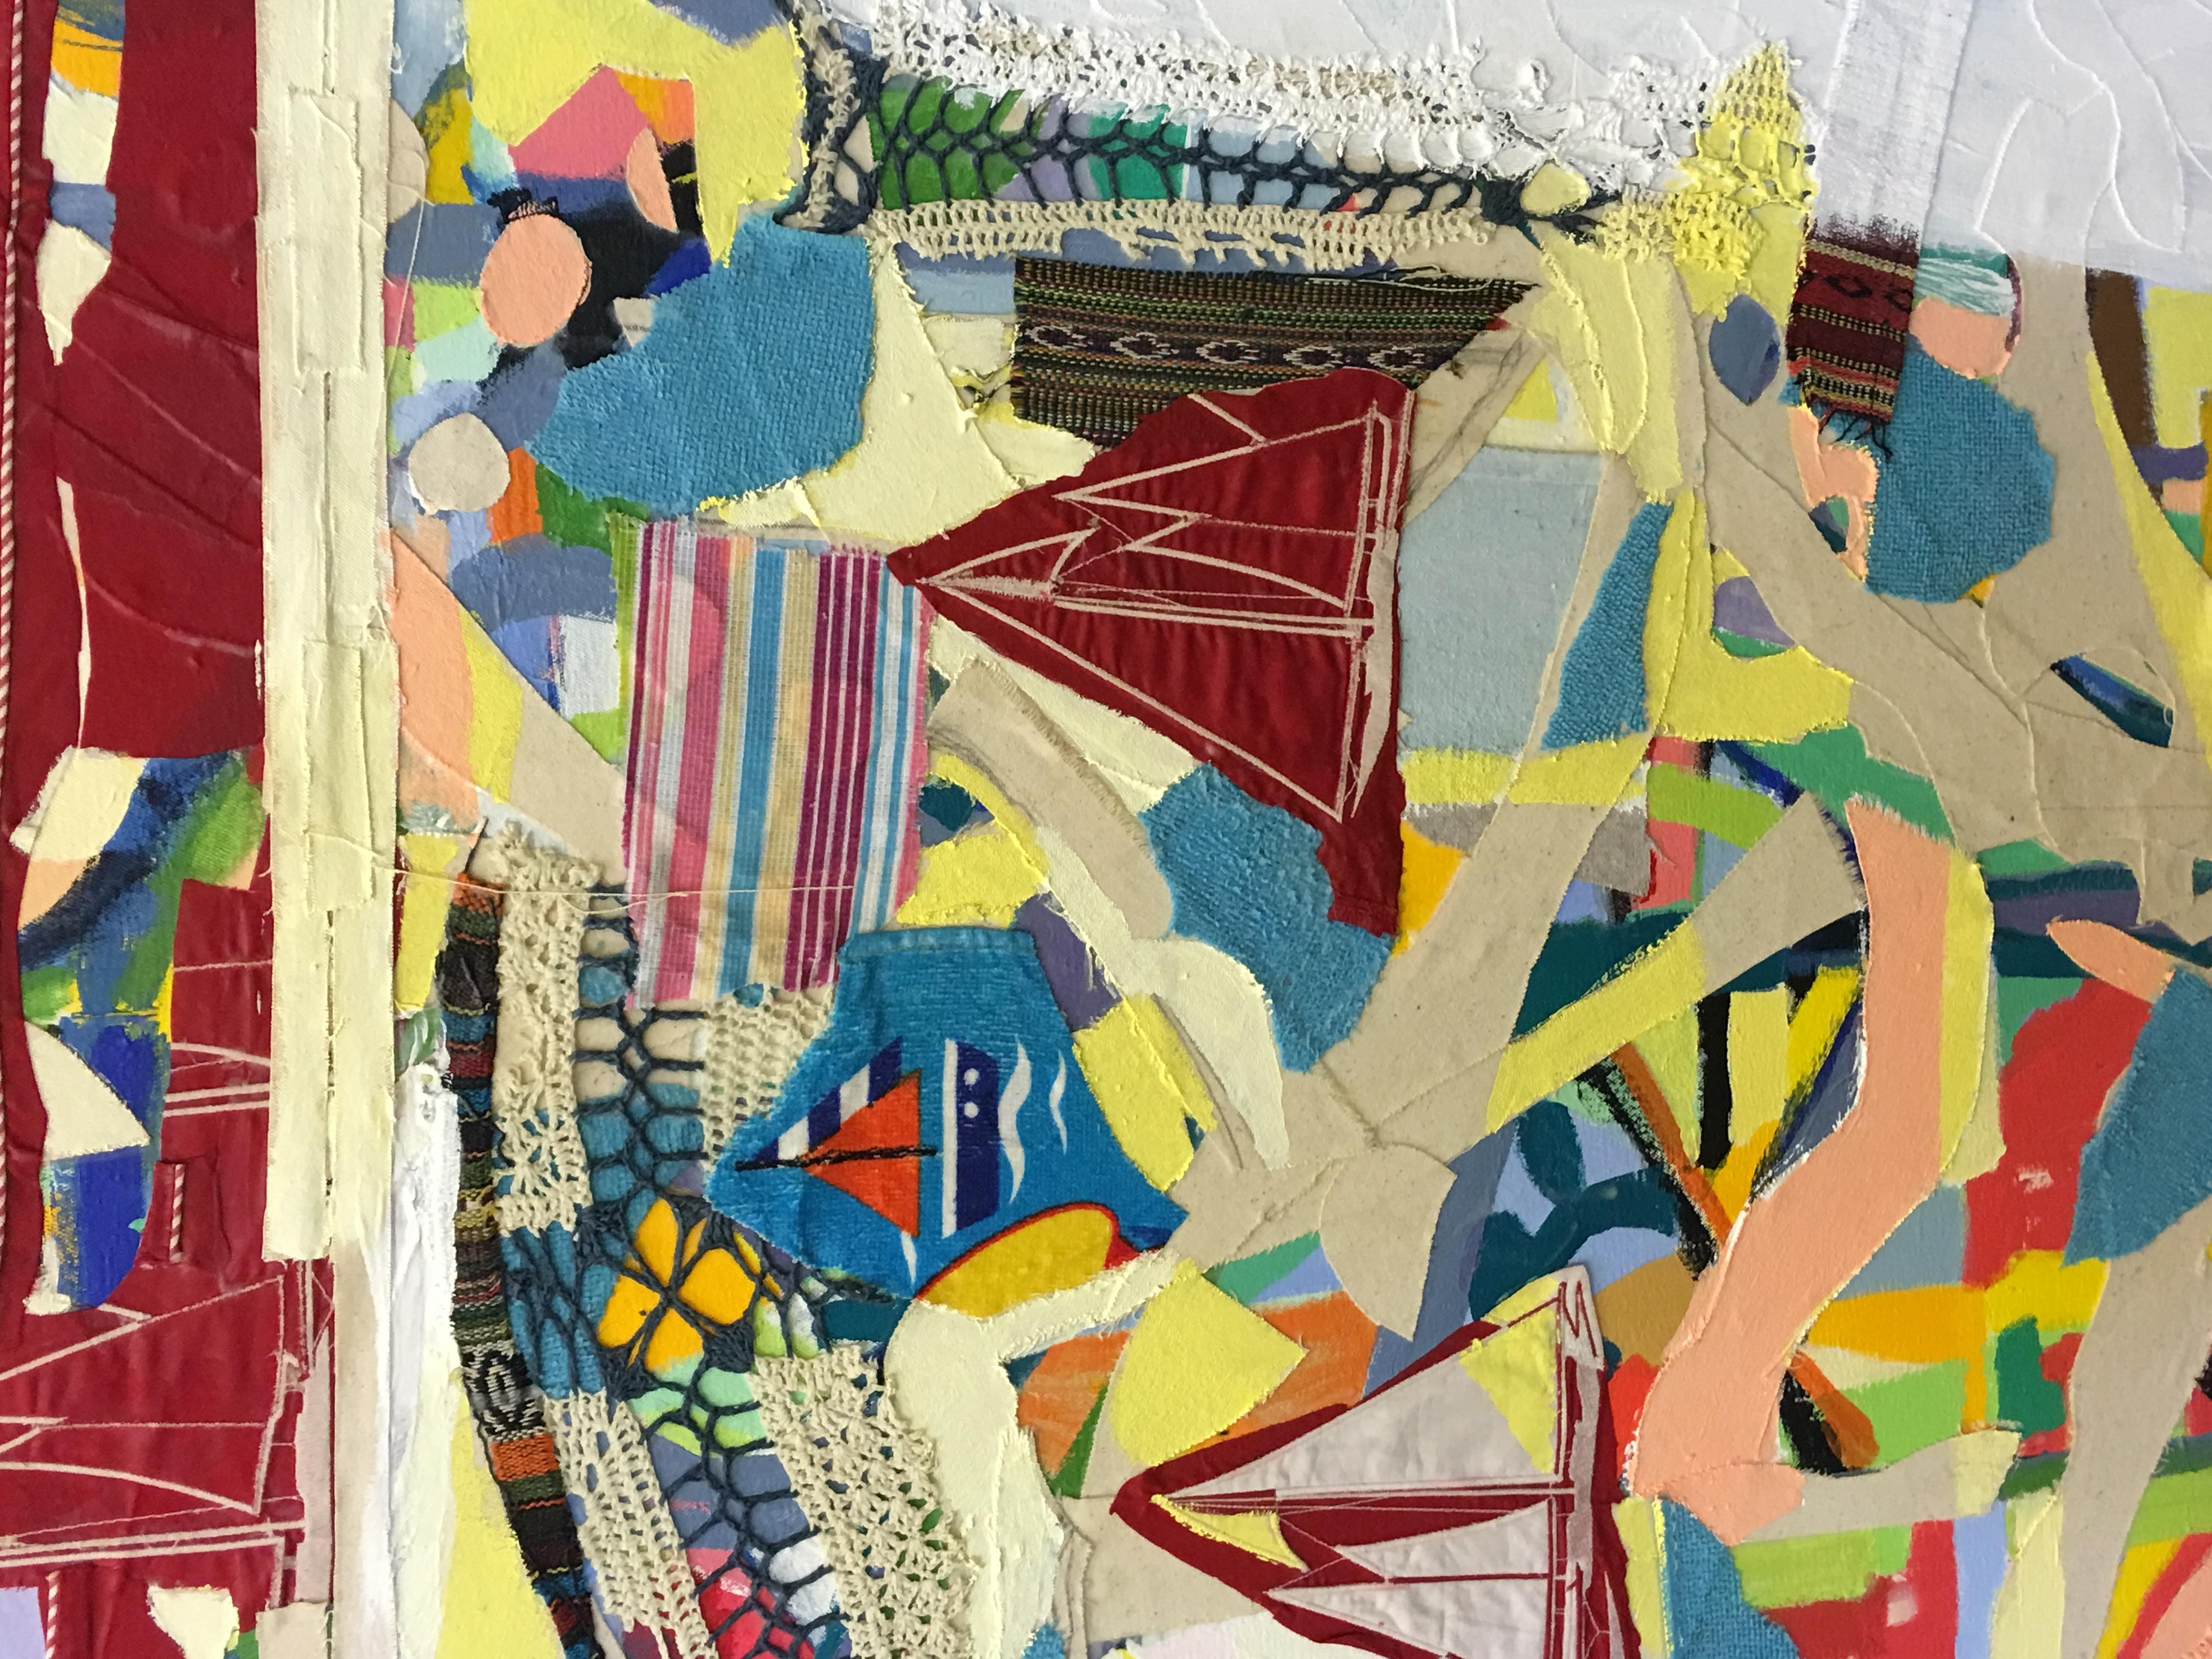 George Schulman's wildly exuberant, colorful and kinetic collage paintings take the viewer on a roller coaster ride in and out of the pictorial plane. Viewed from one perspective, they look like Candy Land-like maps of a fantasy place. 

Their